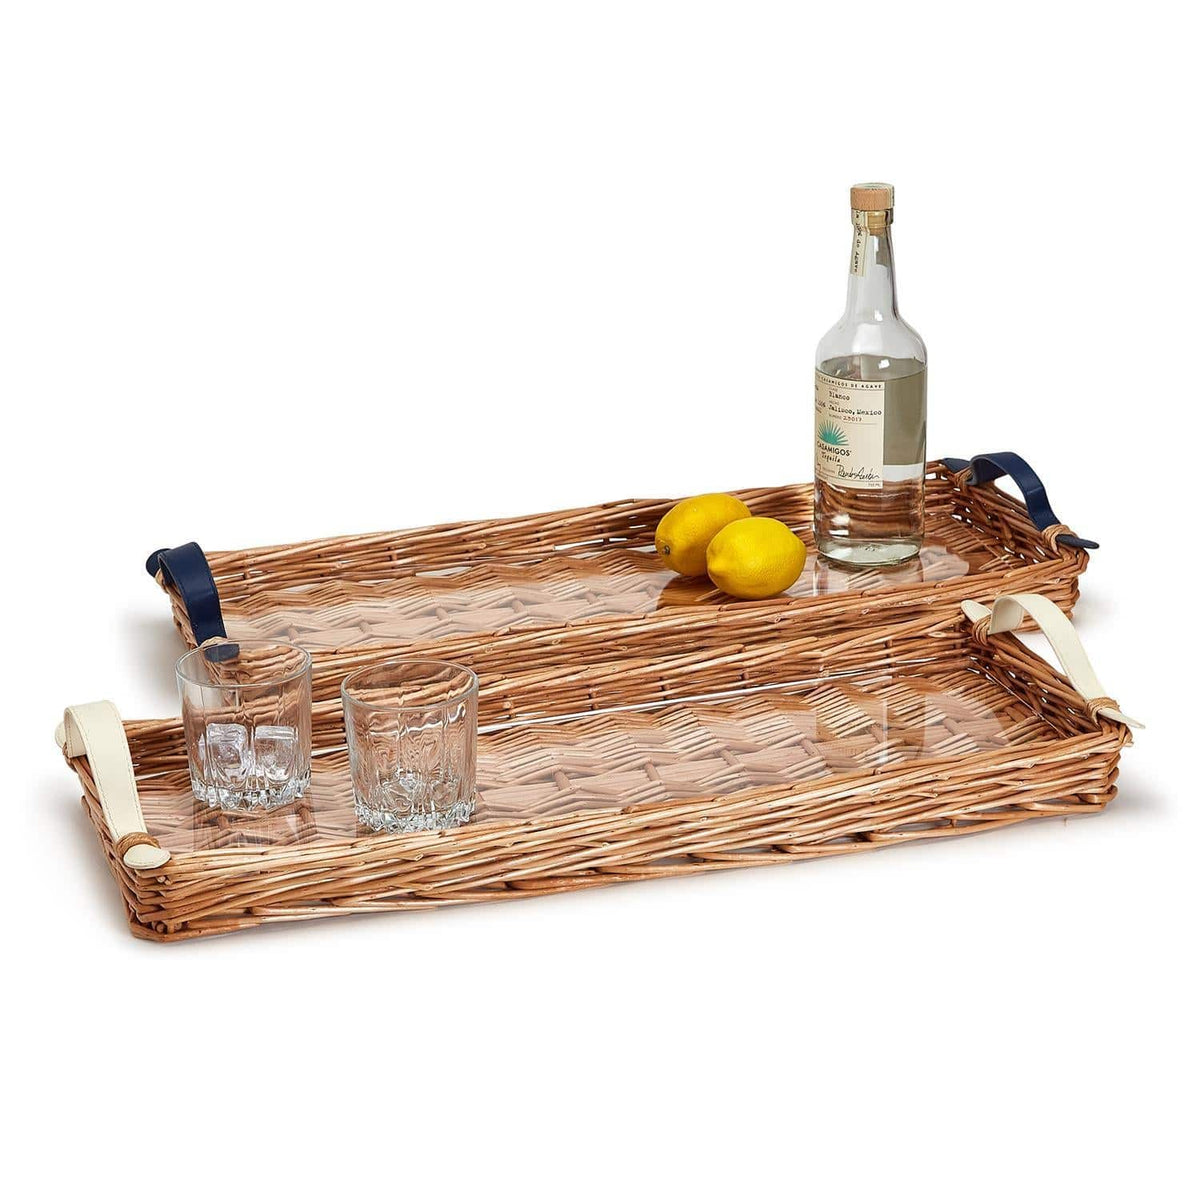 Wicker Tray with Acrylic Insert - 2 colors available - The Preppy Bunny